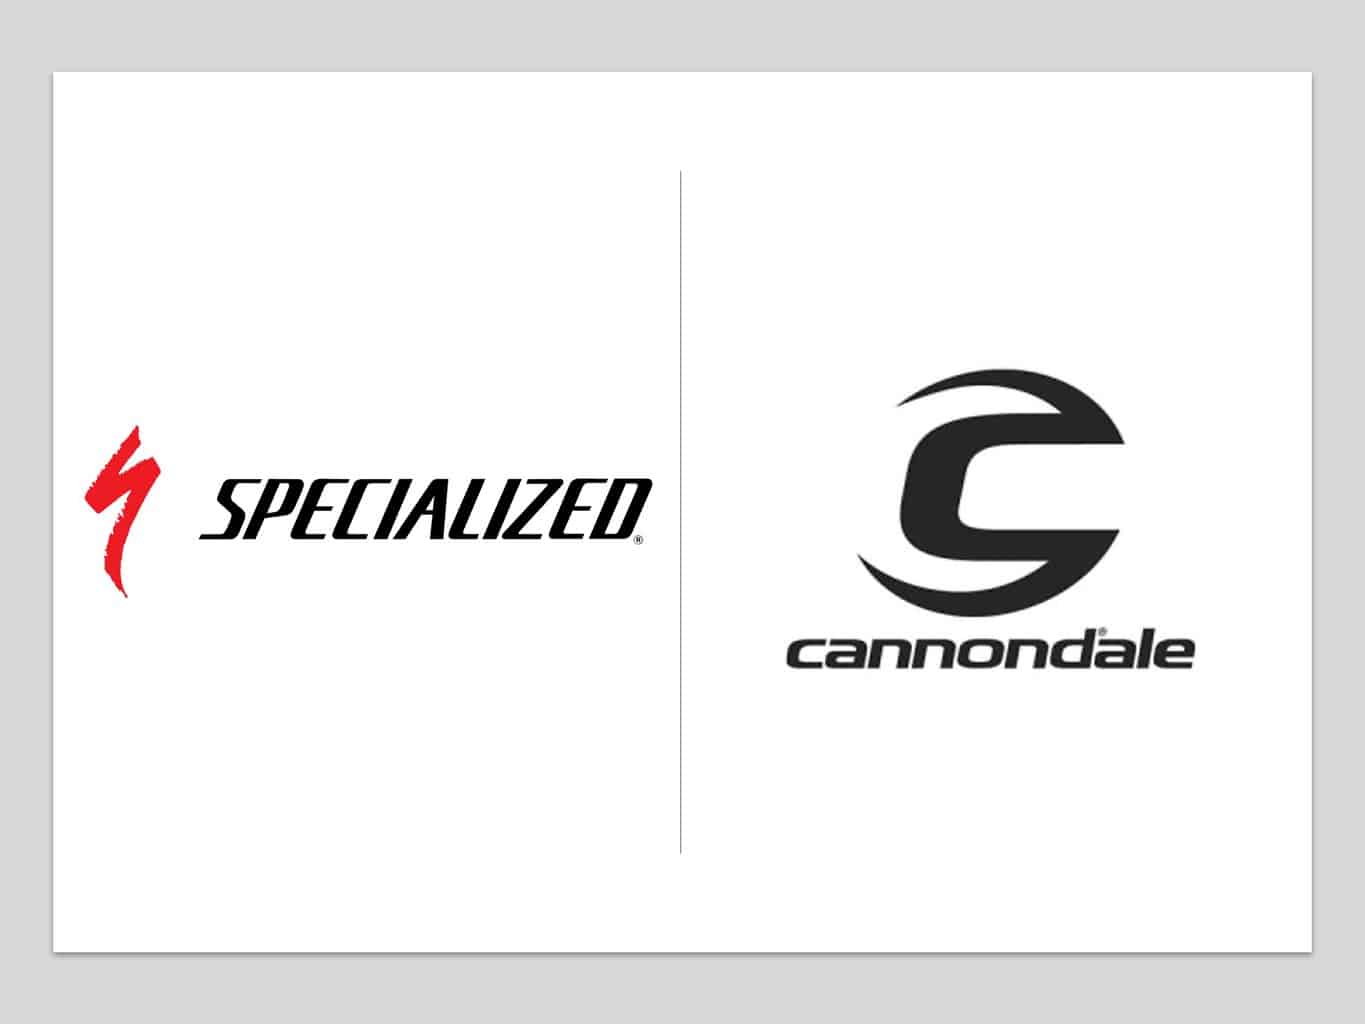 Specialized vs Cannondale Road Bikes